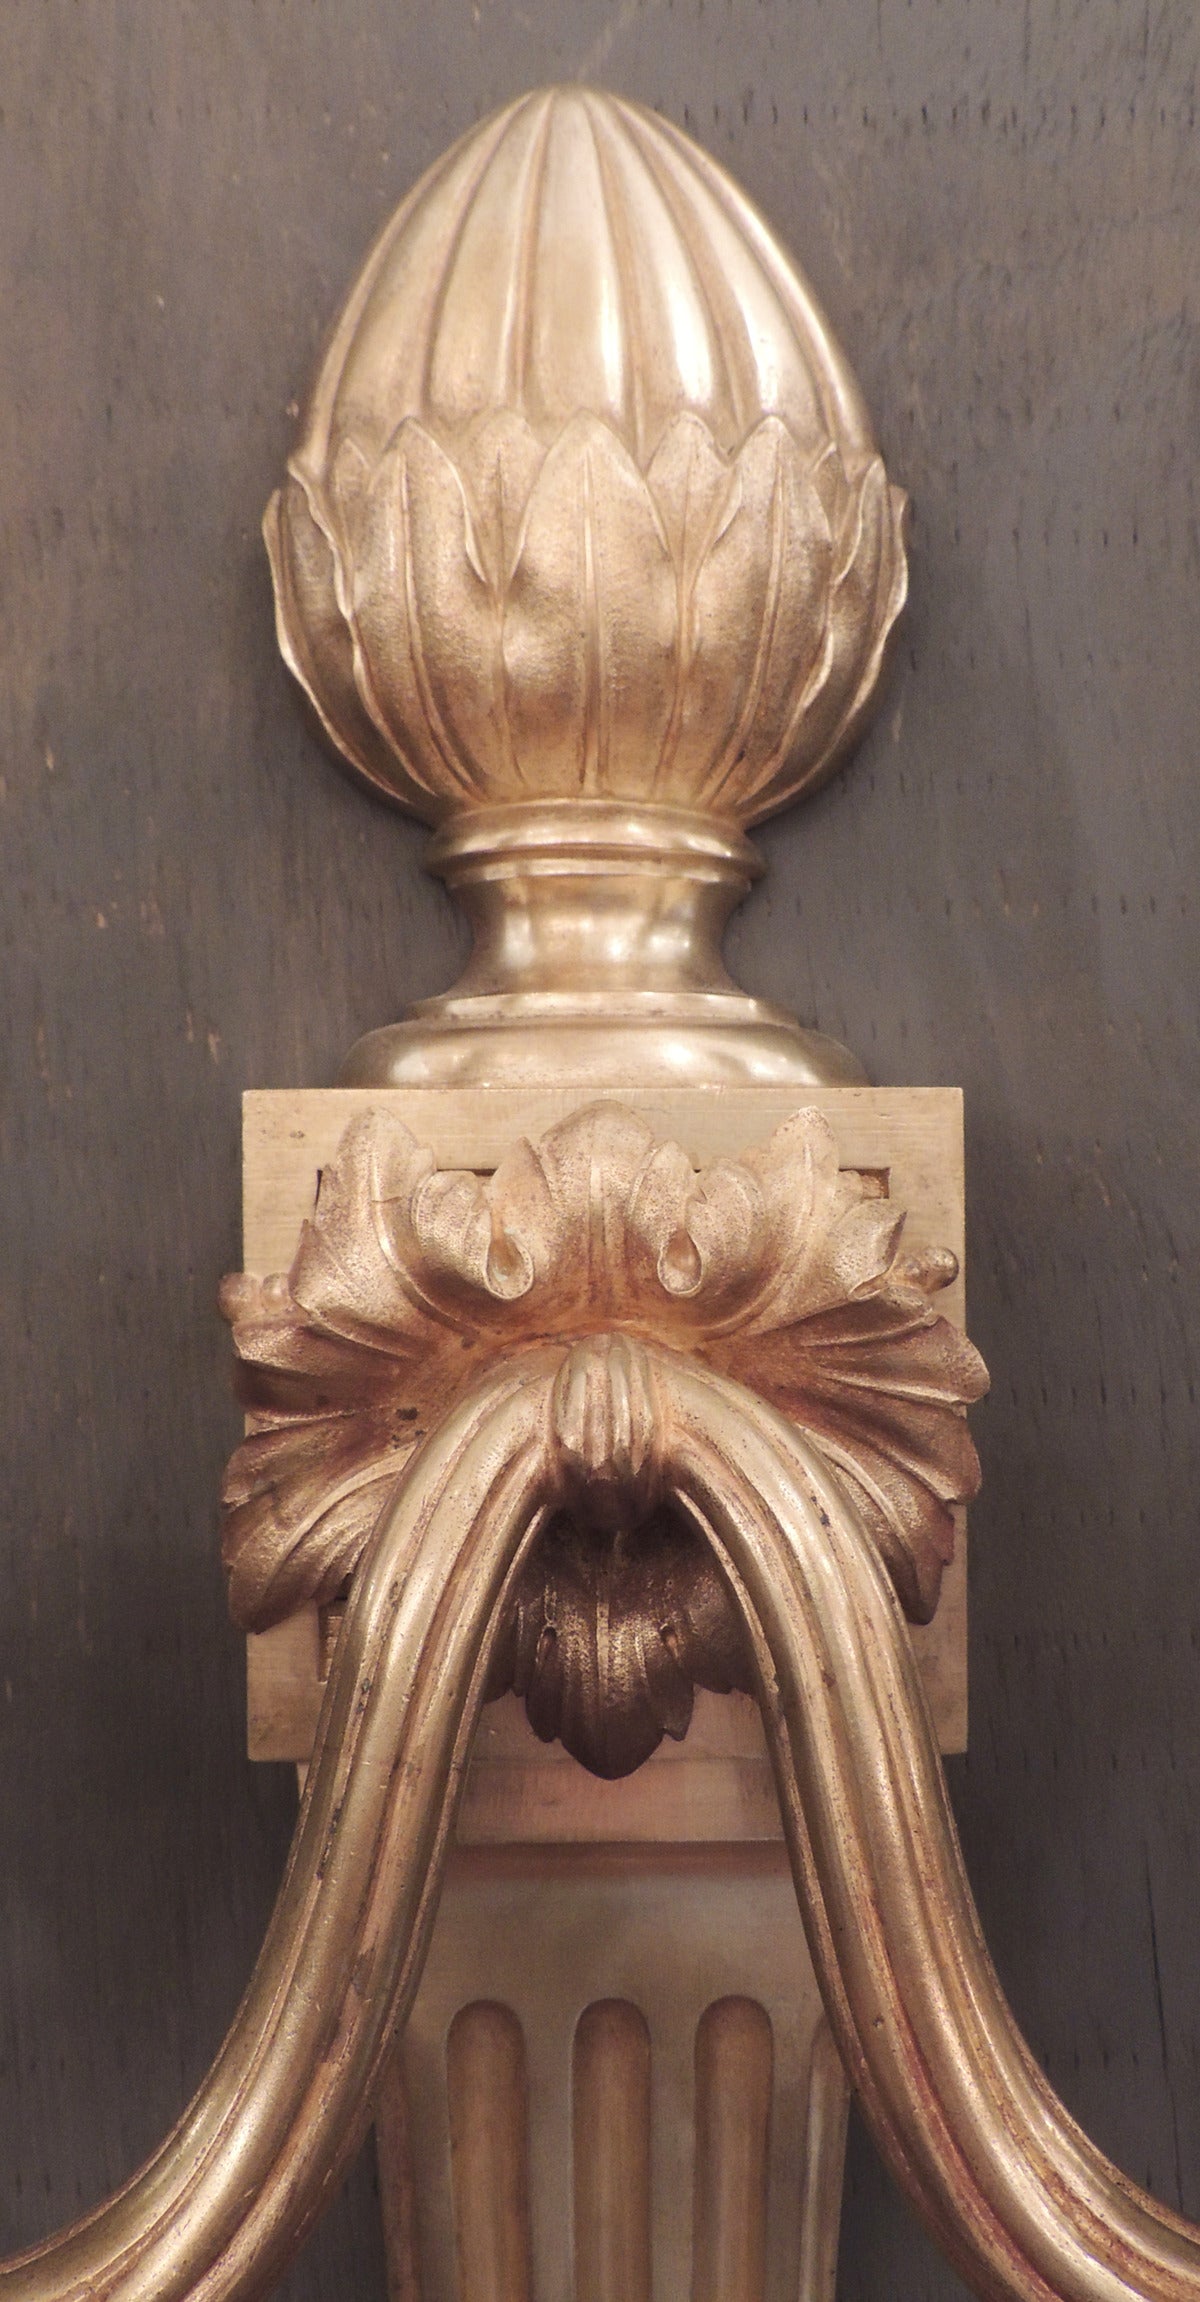 This pair of very large bronze doré sconces were created in France in the 19th century, circa 1840. This pair features a top acorn finial that sits on a Doric column with a floral motif. The bottom has foliage and a smaller acorn finial. Each